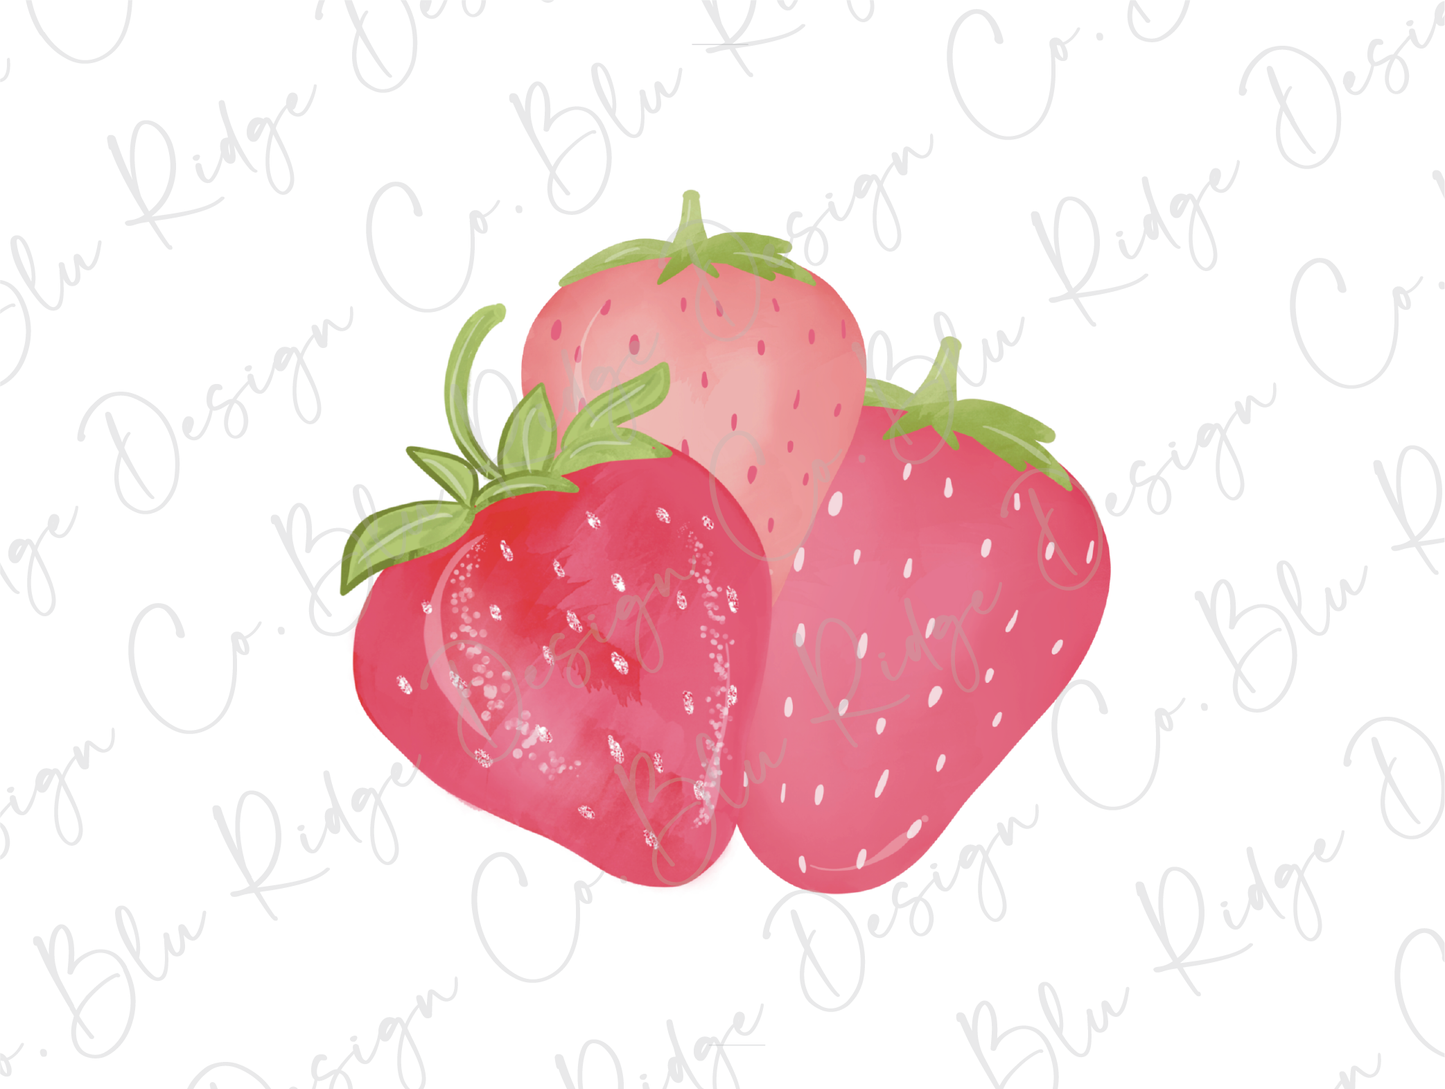 Trendy Sweet Strawberry Summer Vibes Strawberry Design Direct To Film (DTF) Transfer